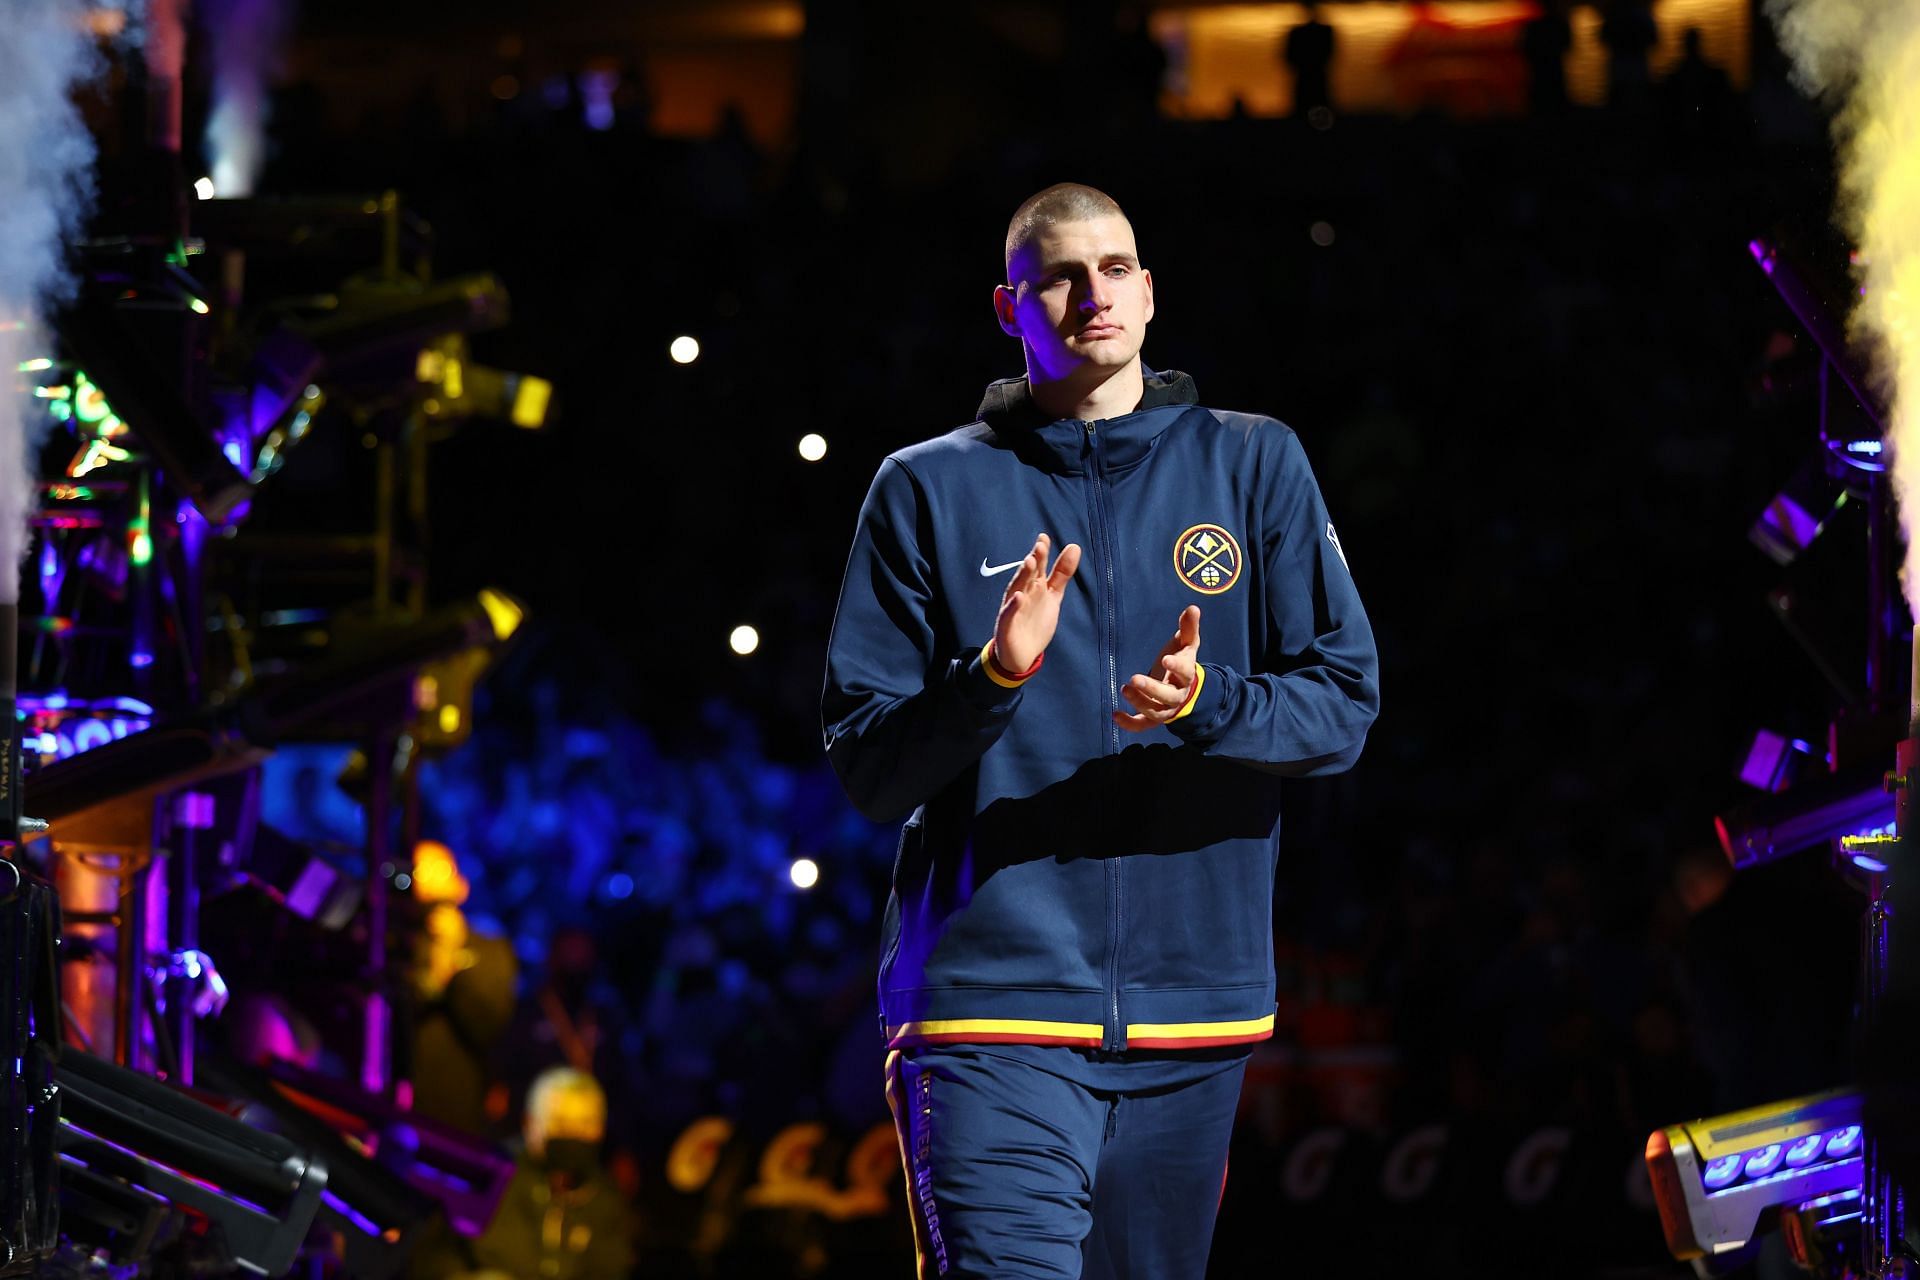 Nikola Jokic #15 of the Denver Nuggets is introduced during pregame against the San Antonio Spurs.